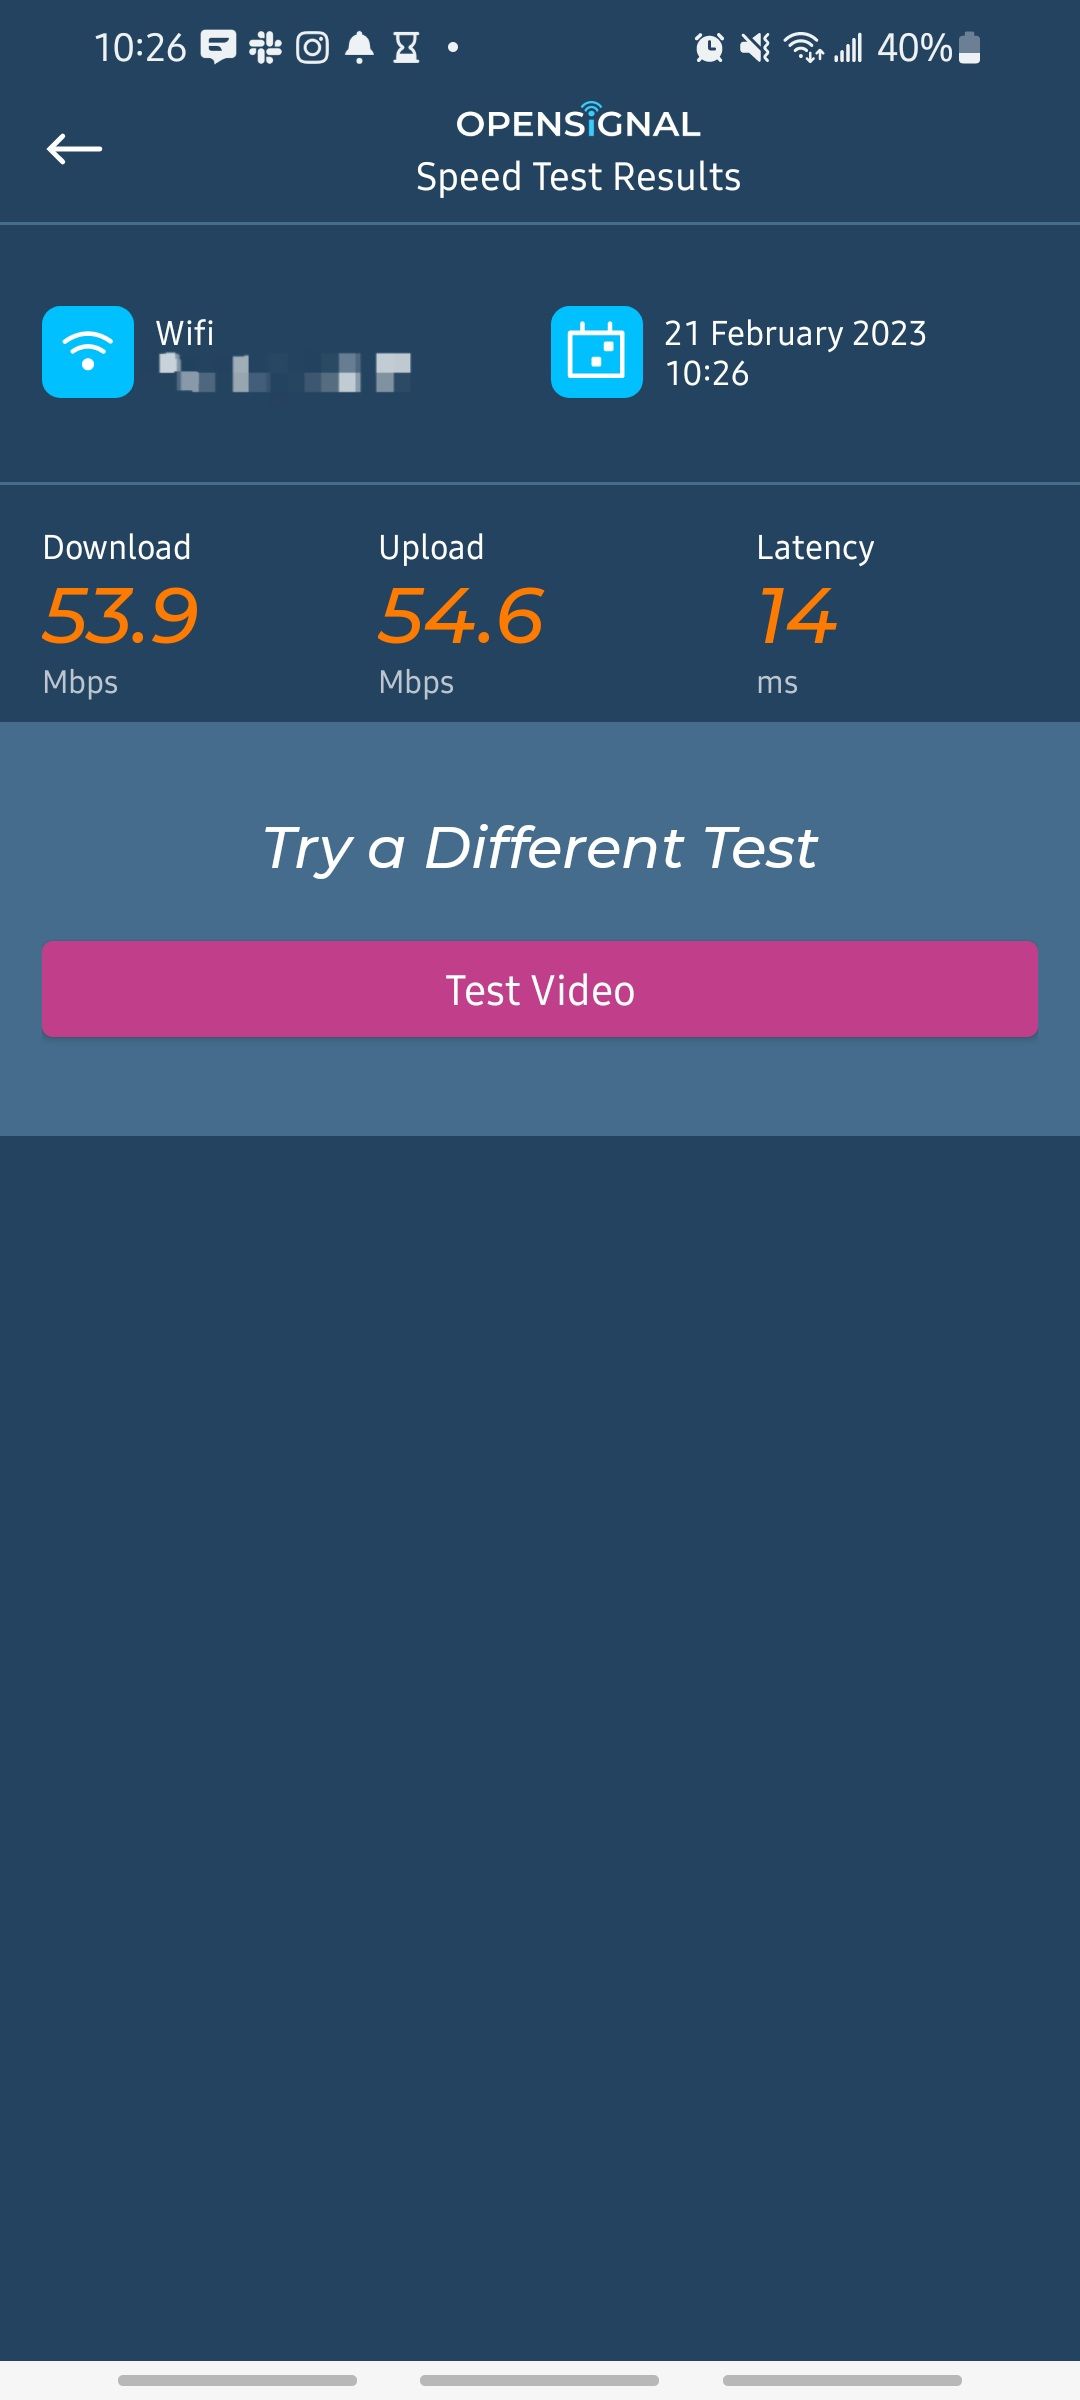 Screenshot of Video Test Results in the Opensignal app